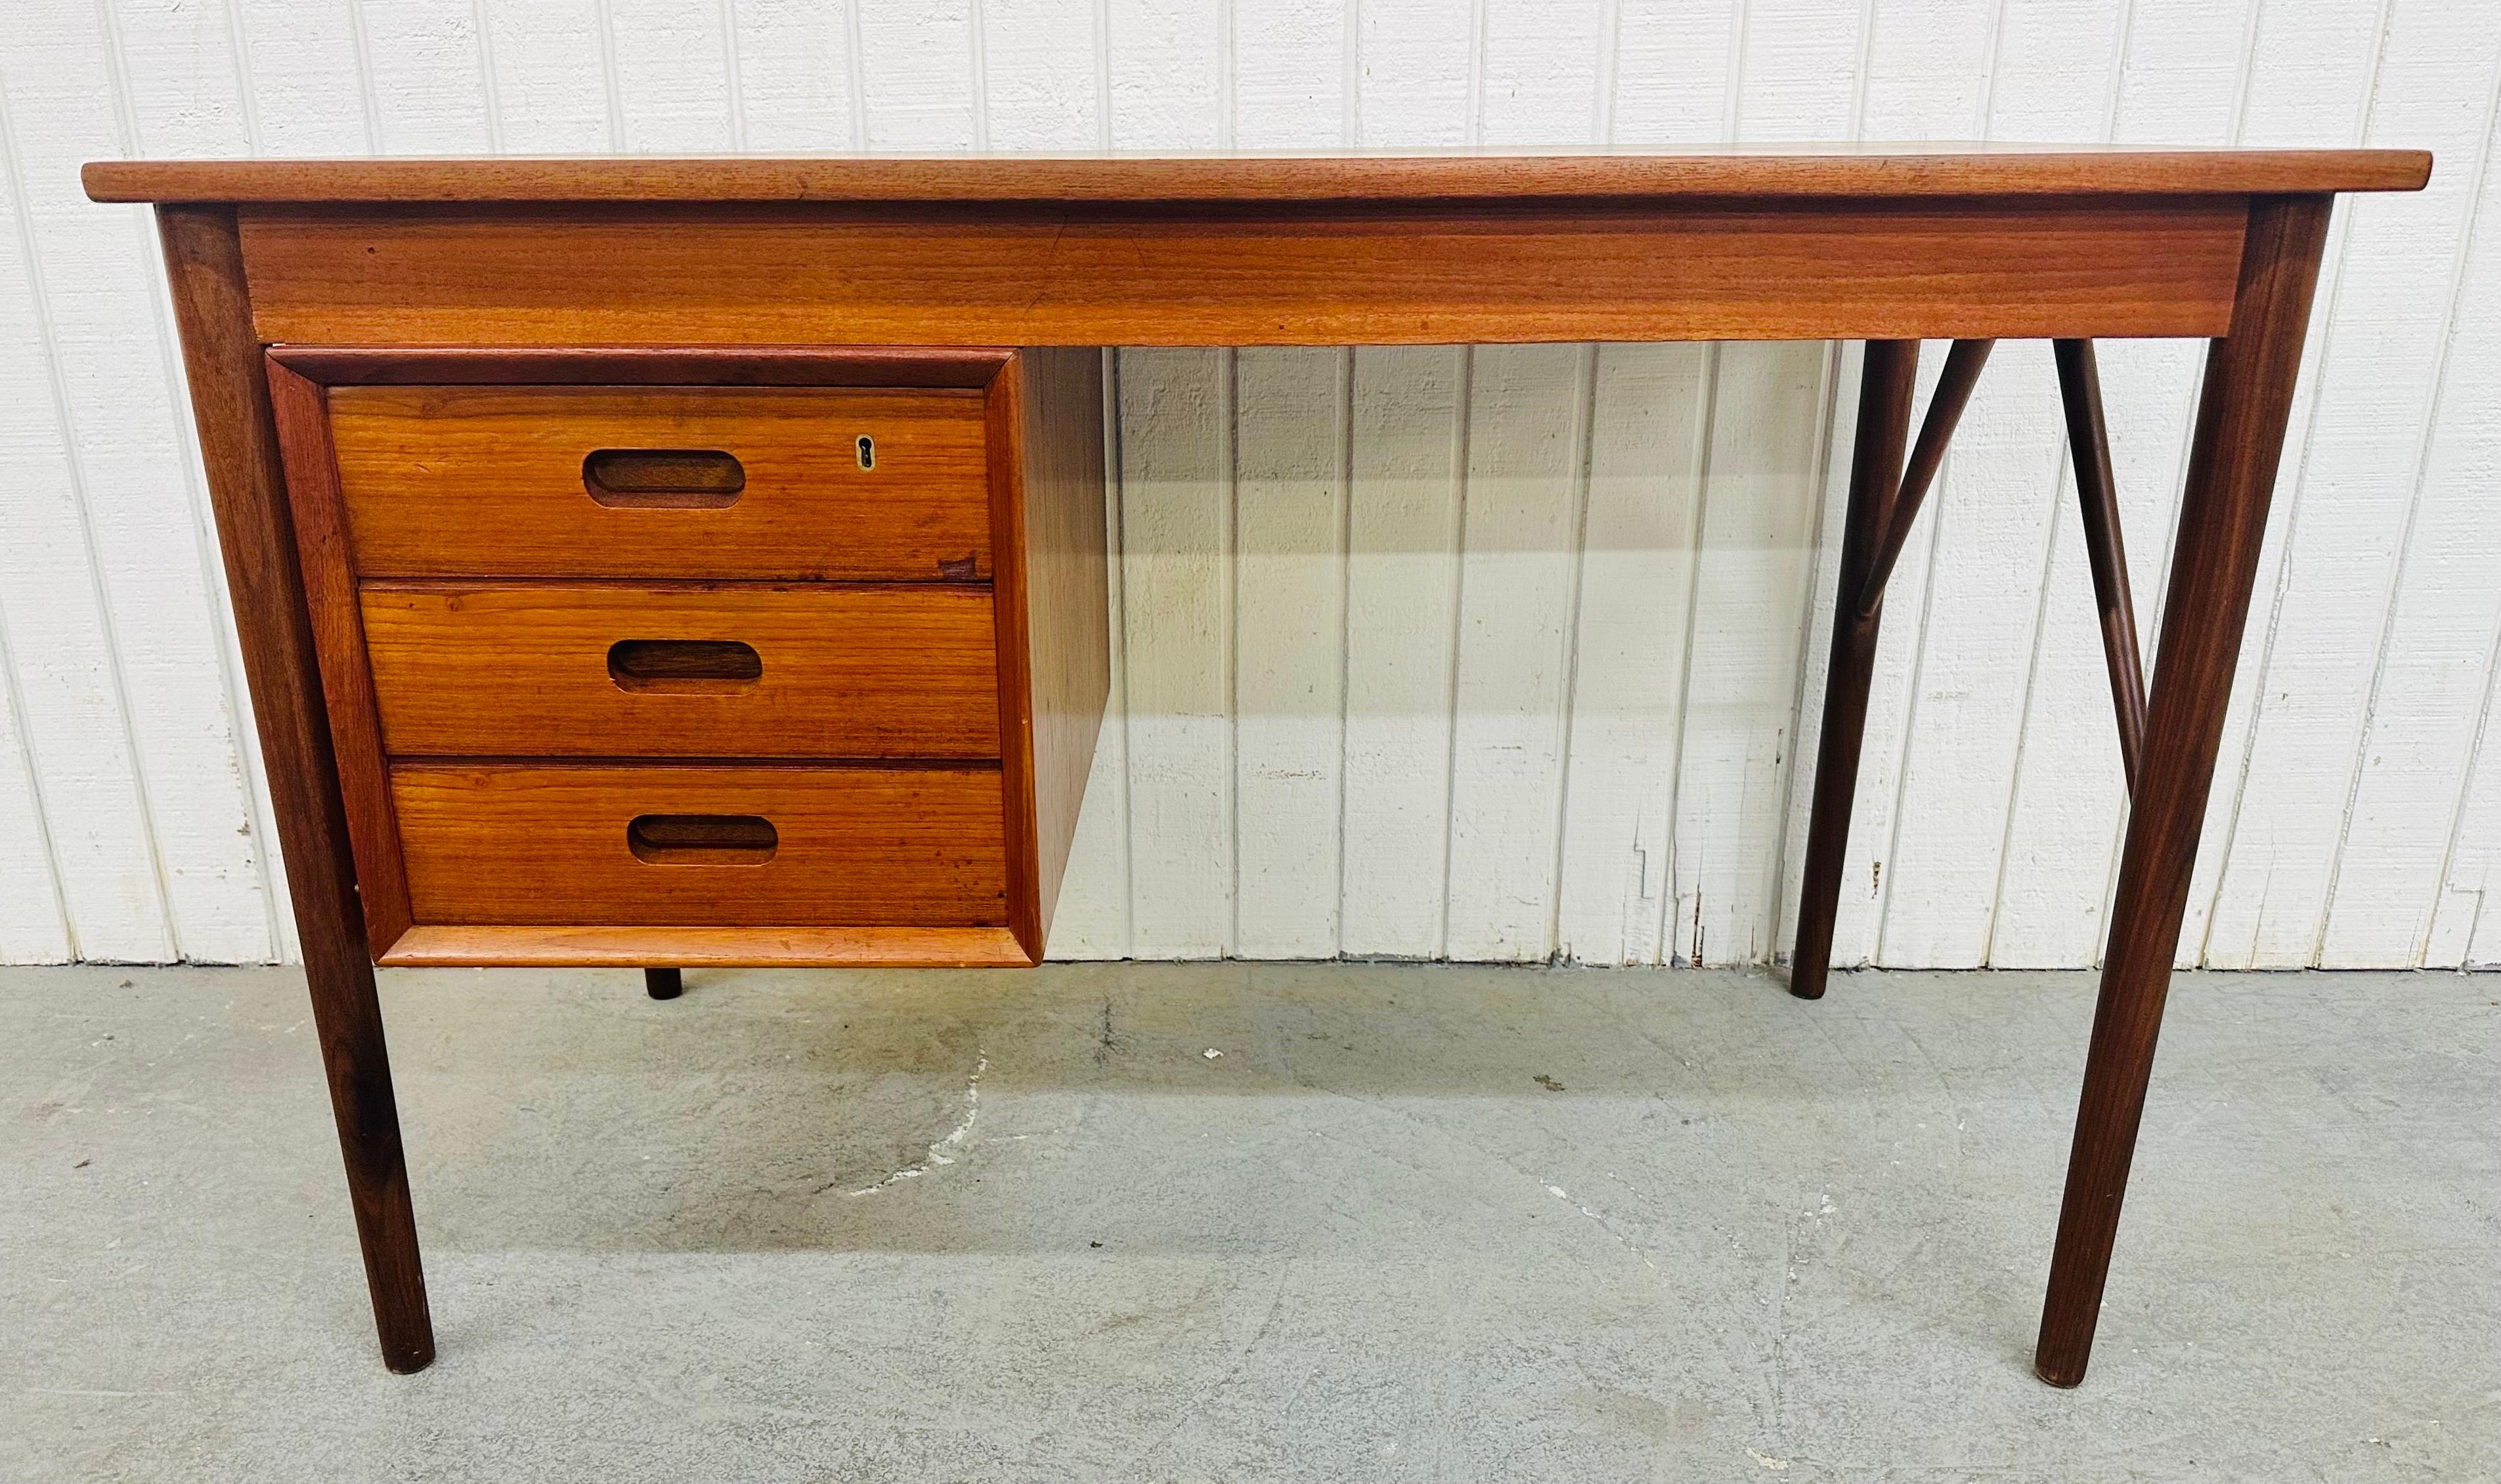 This listing is for a Mid-Century Danish Modern Teak Writing Desk. Featuring rectangular writing surface, four long skinny legs, hanging three drawer cabinet on the left side, a finished backside with storage space, and a beautiful teak finish. This